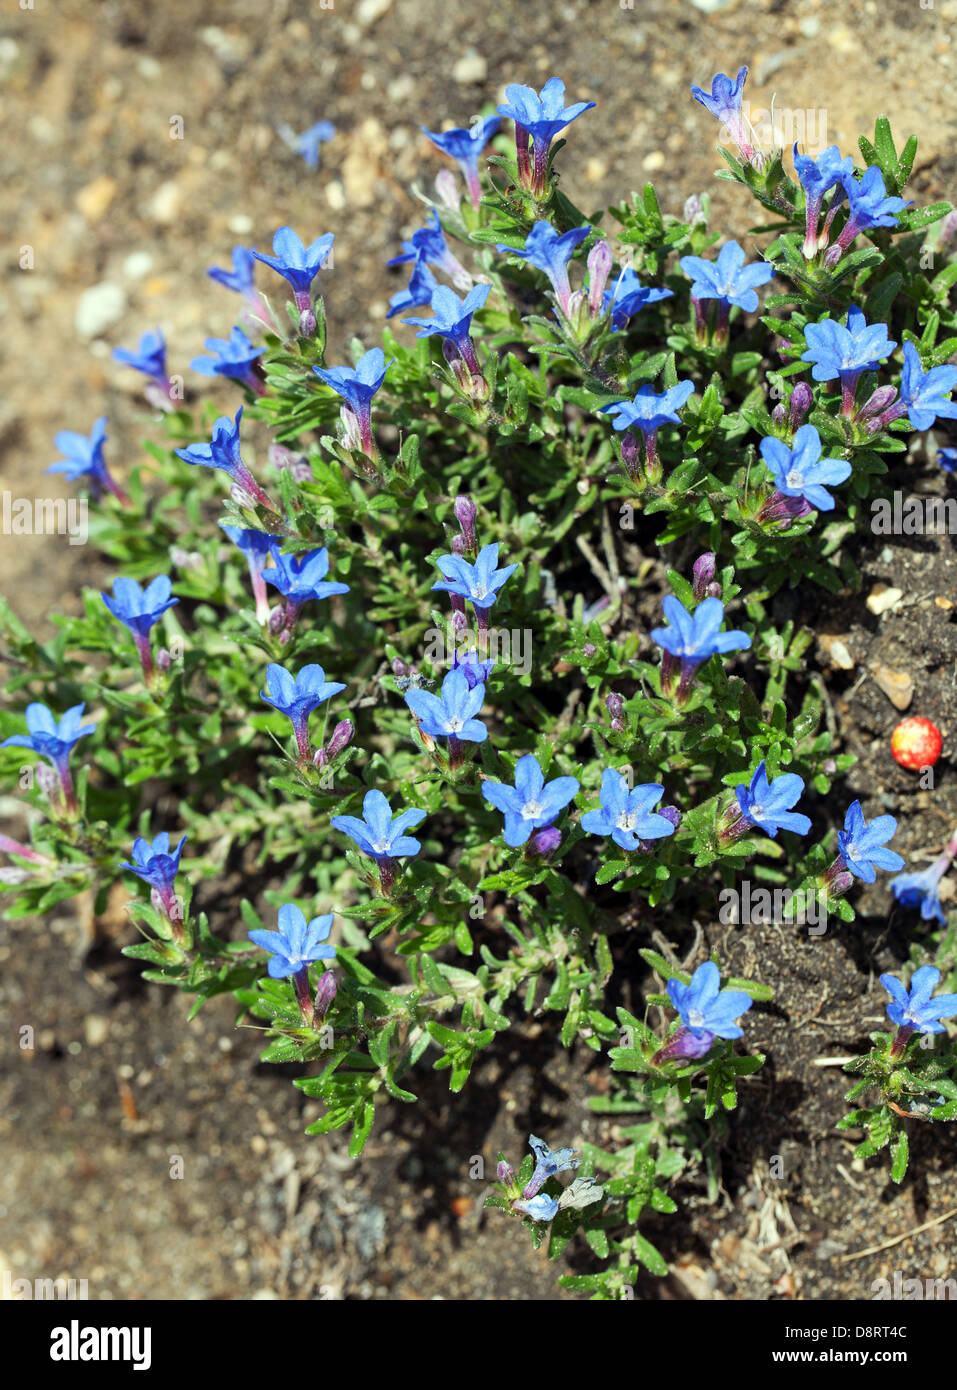 Lithodora Diffusa 'heavenly blue' flowers and plant UK Stock Photo